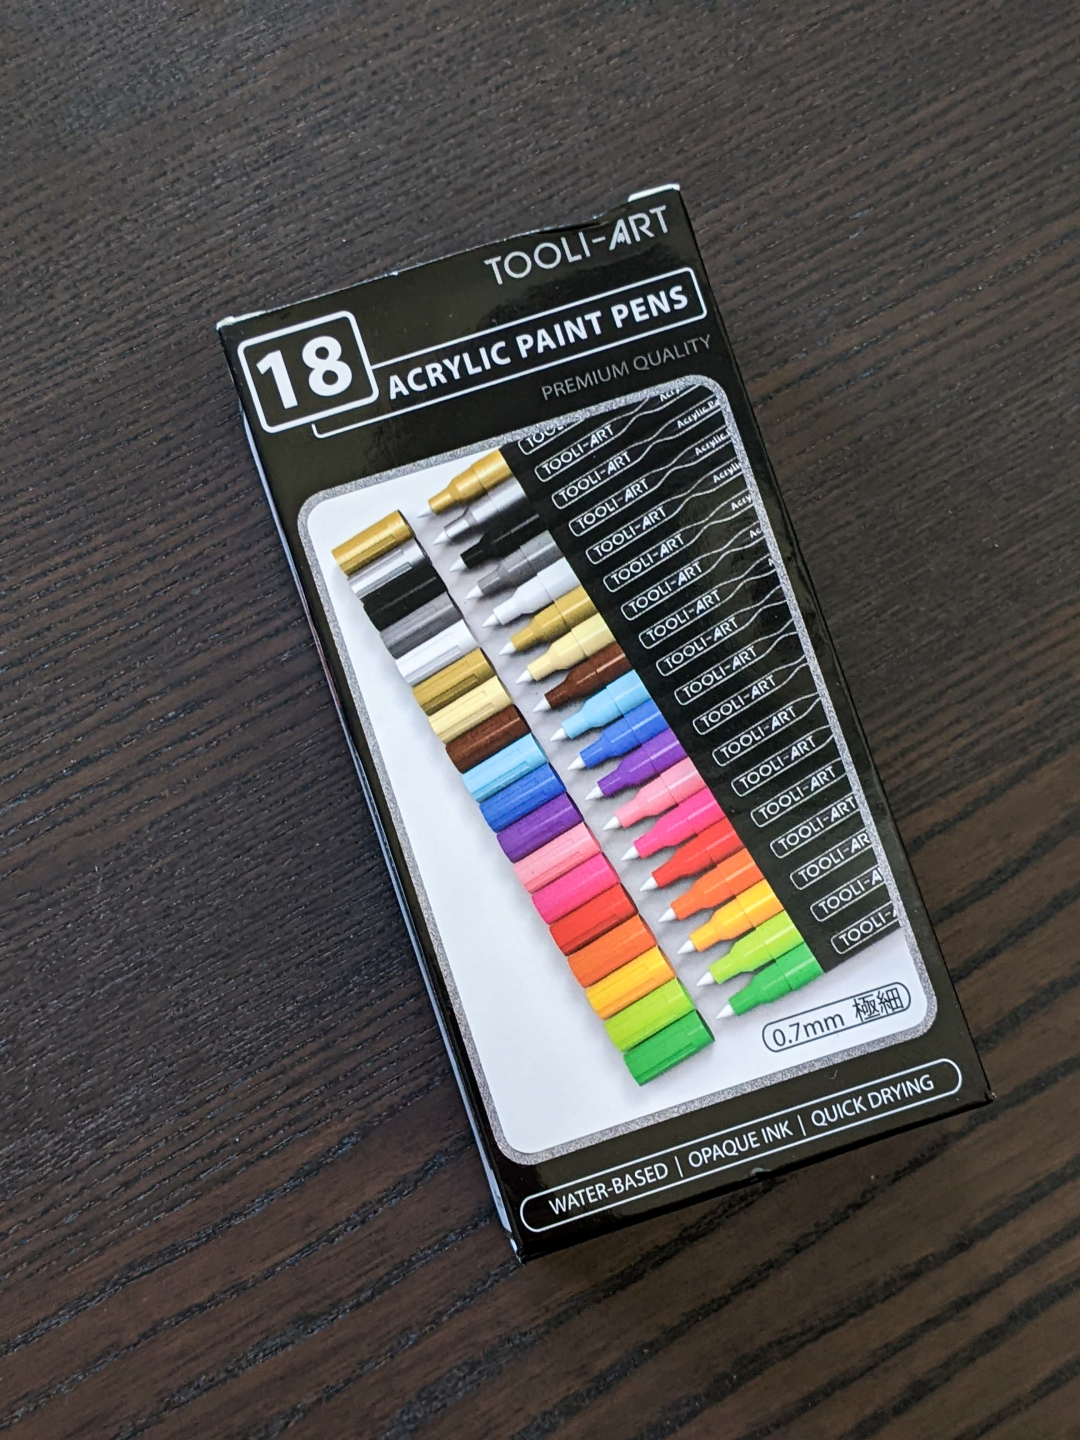 Swatching out Tooli Art Acrylic Paint Pens and how I've been using them